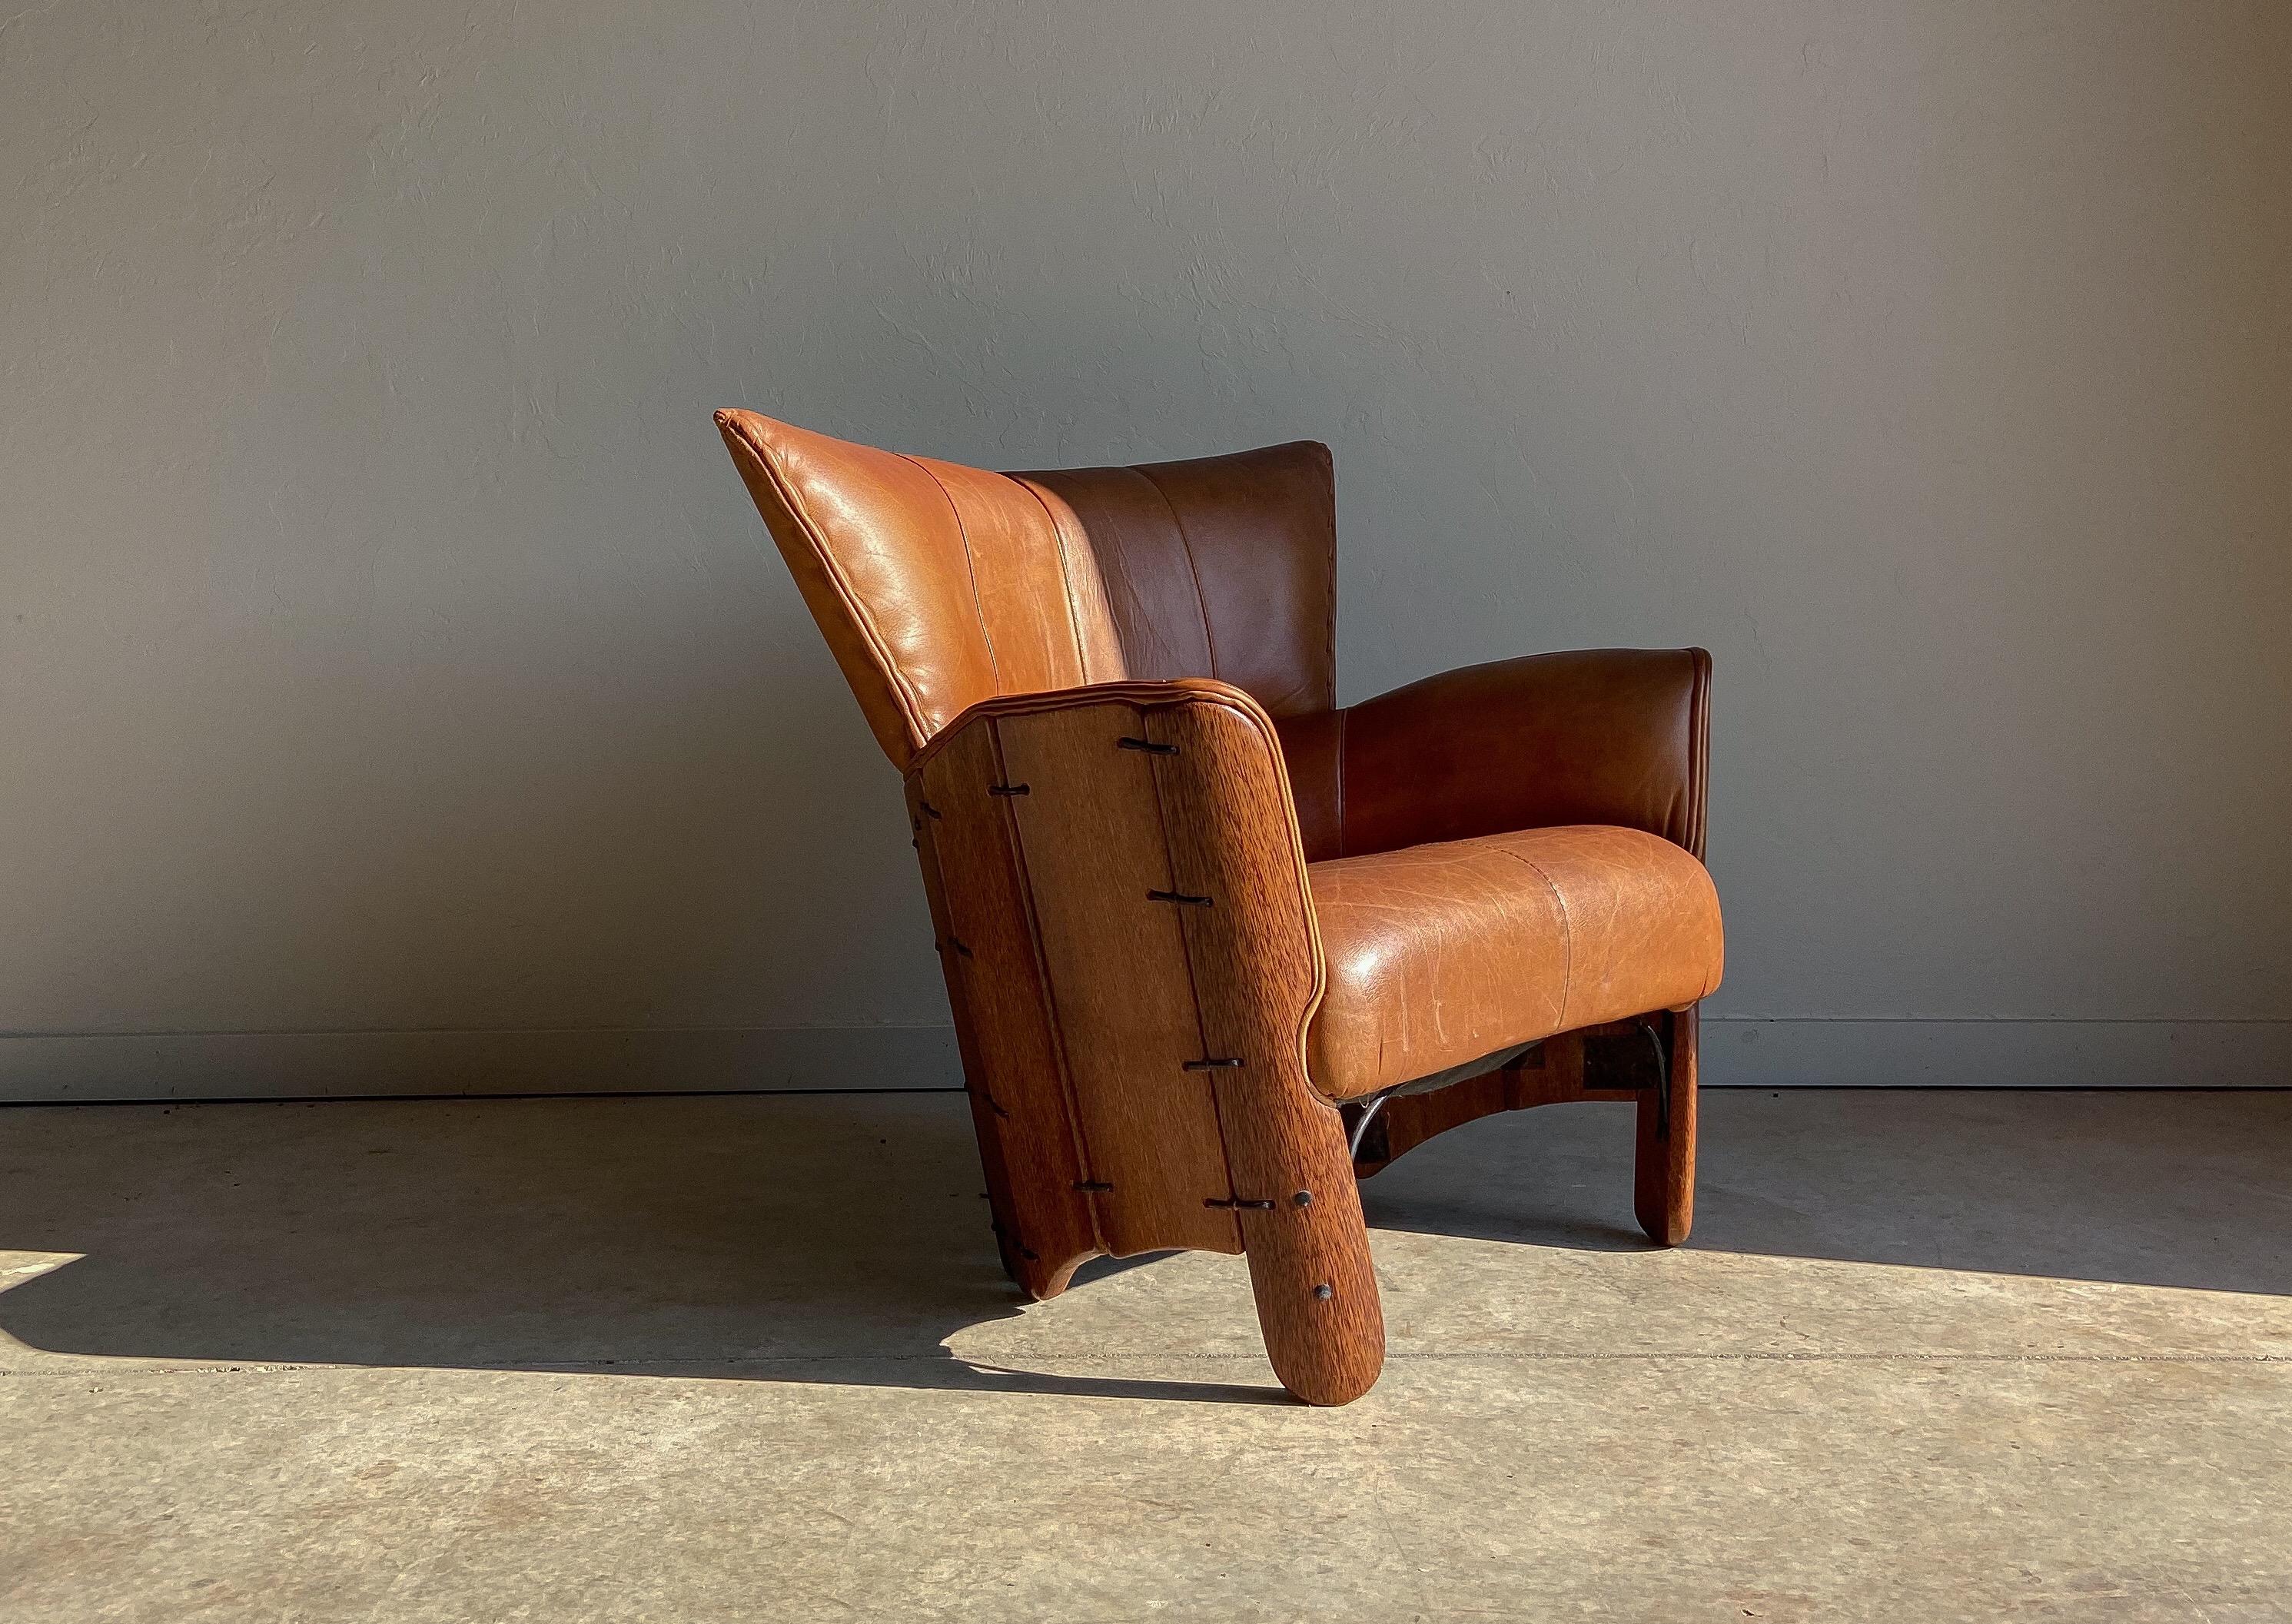 A wonderful and unique leather lounge chair by Pacific Green. Pacific Green is known for using sustainable top grade materials and expert craftsmanship. 

This chair is quite comfortable and has a wonderful patina that will only get better with age.